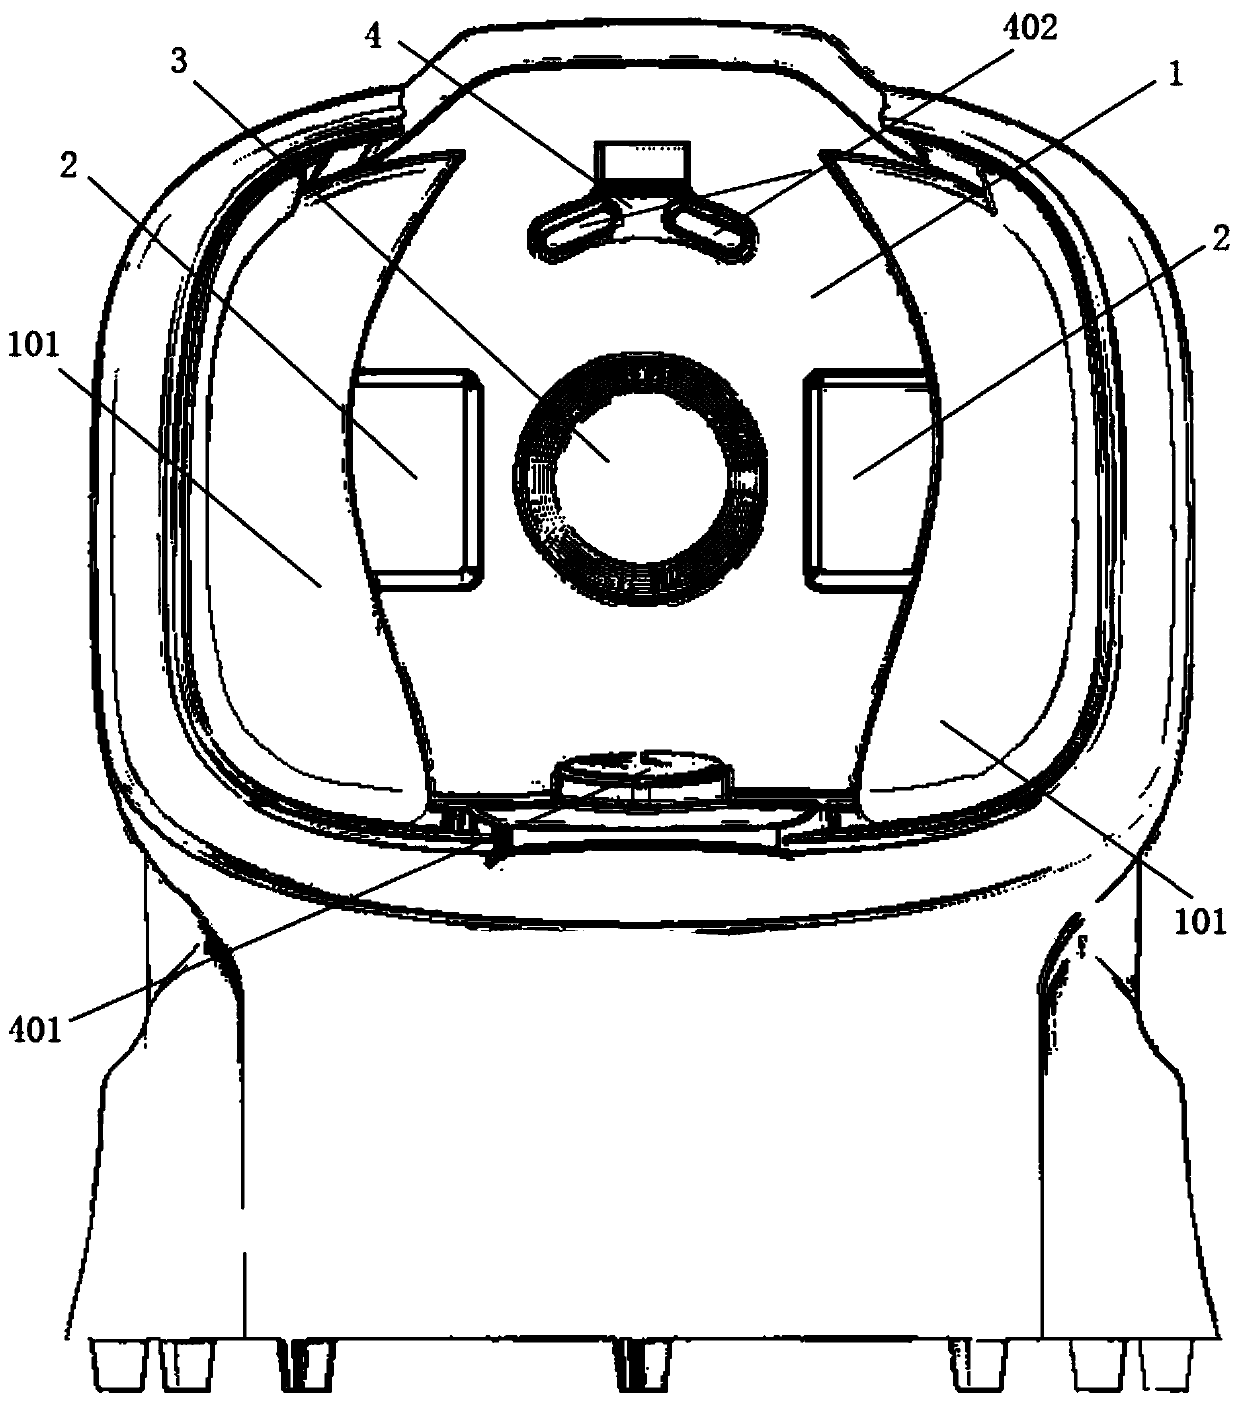 Facial image acquisition device for skin analysis